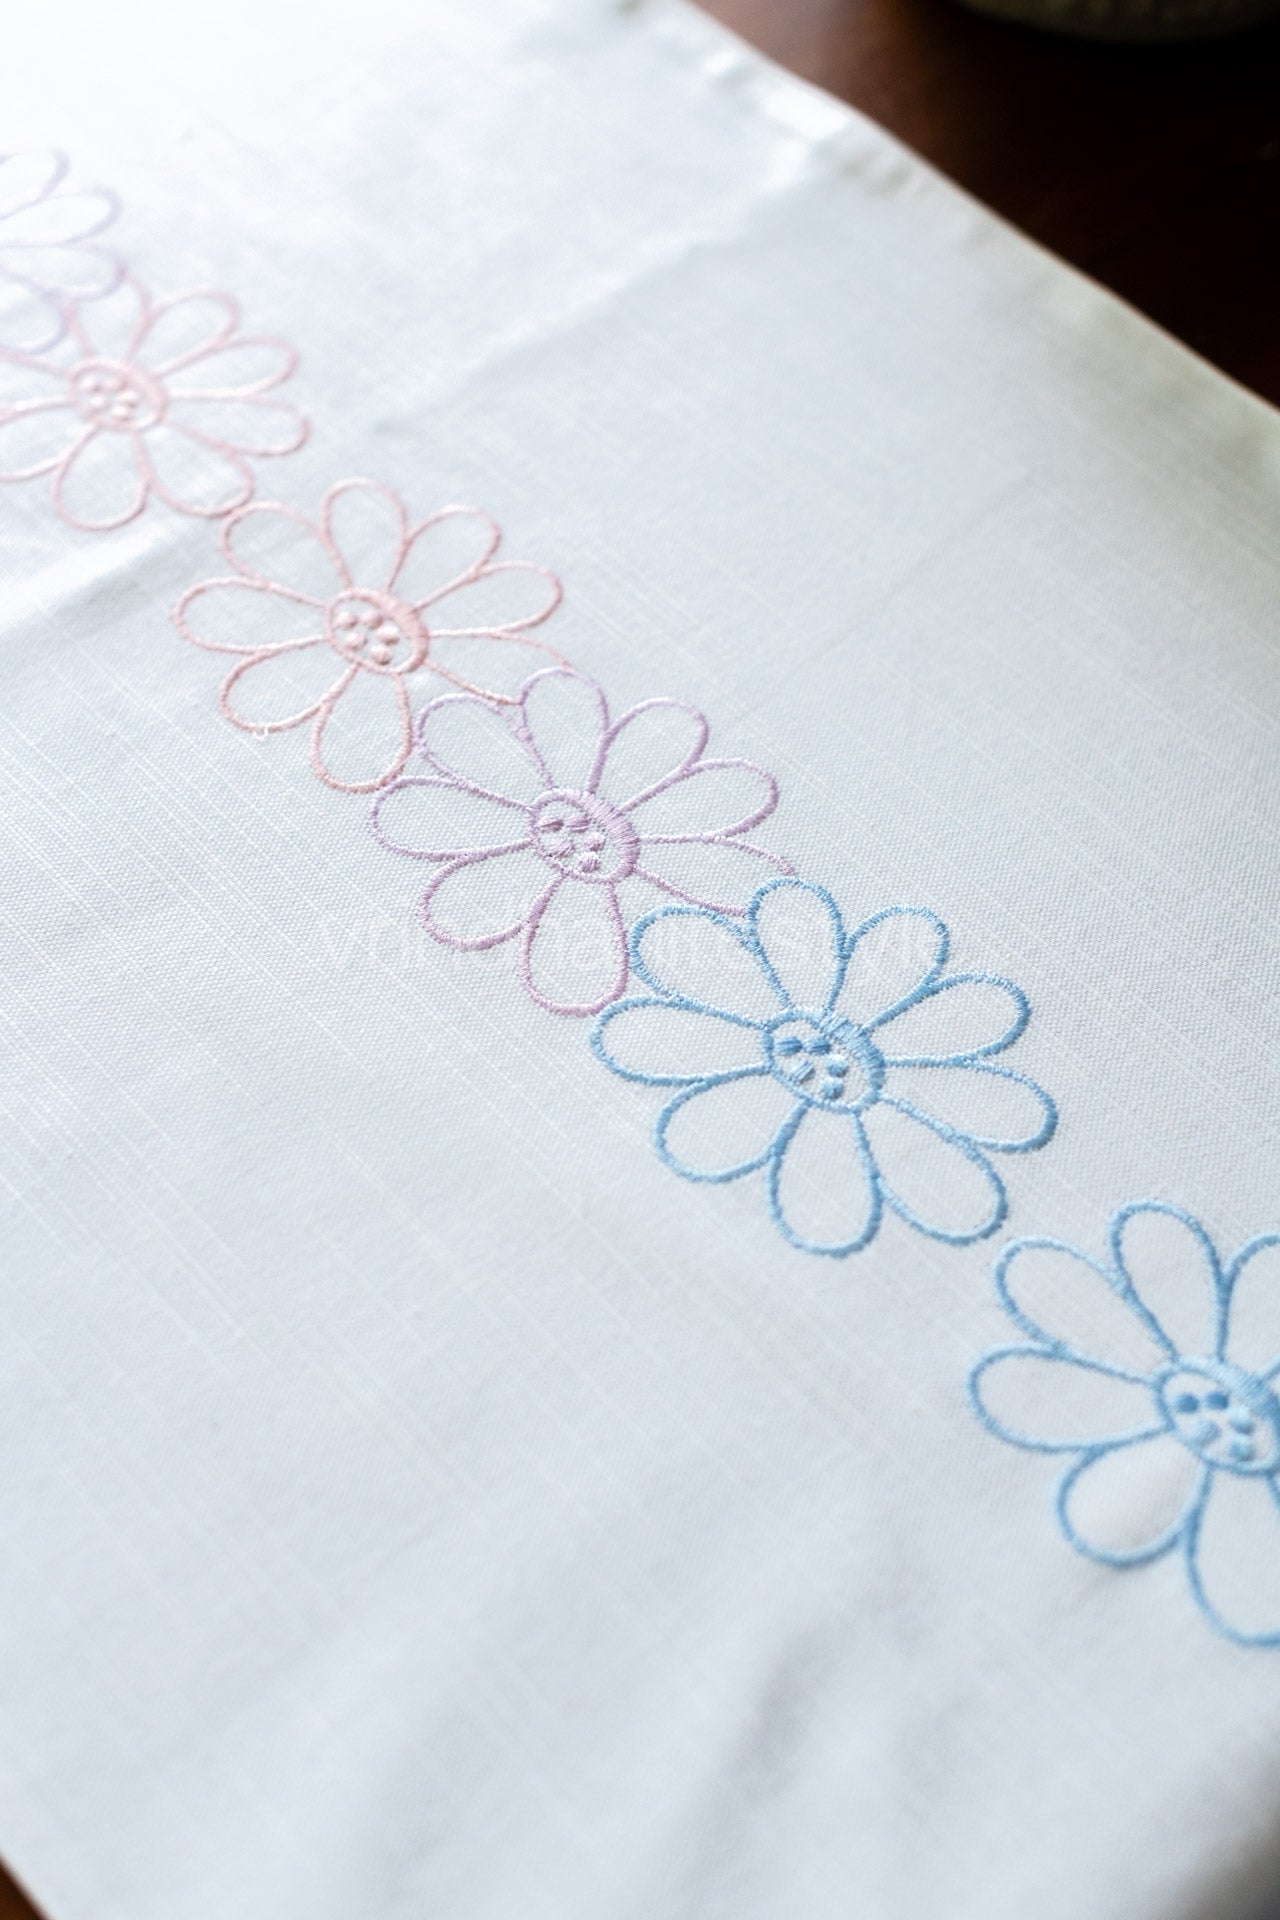 Cotton slub table runner with embroidery - 15x55 inches-customisable